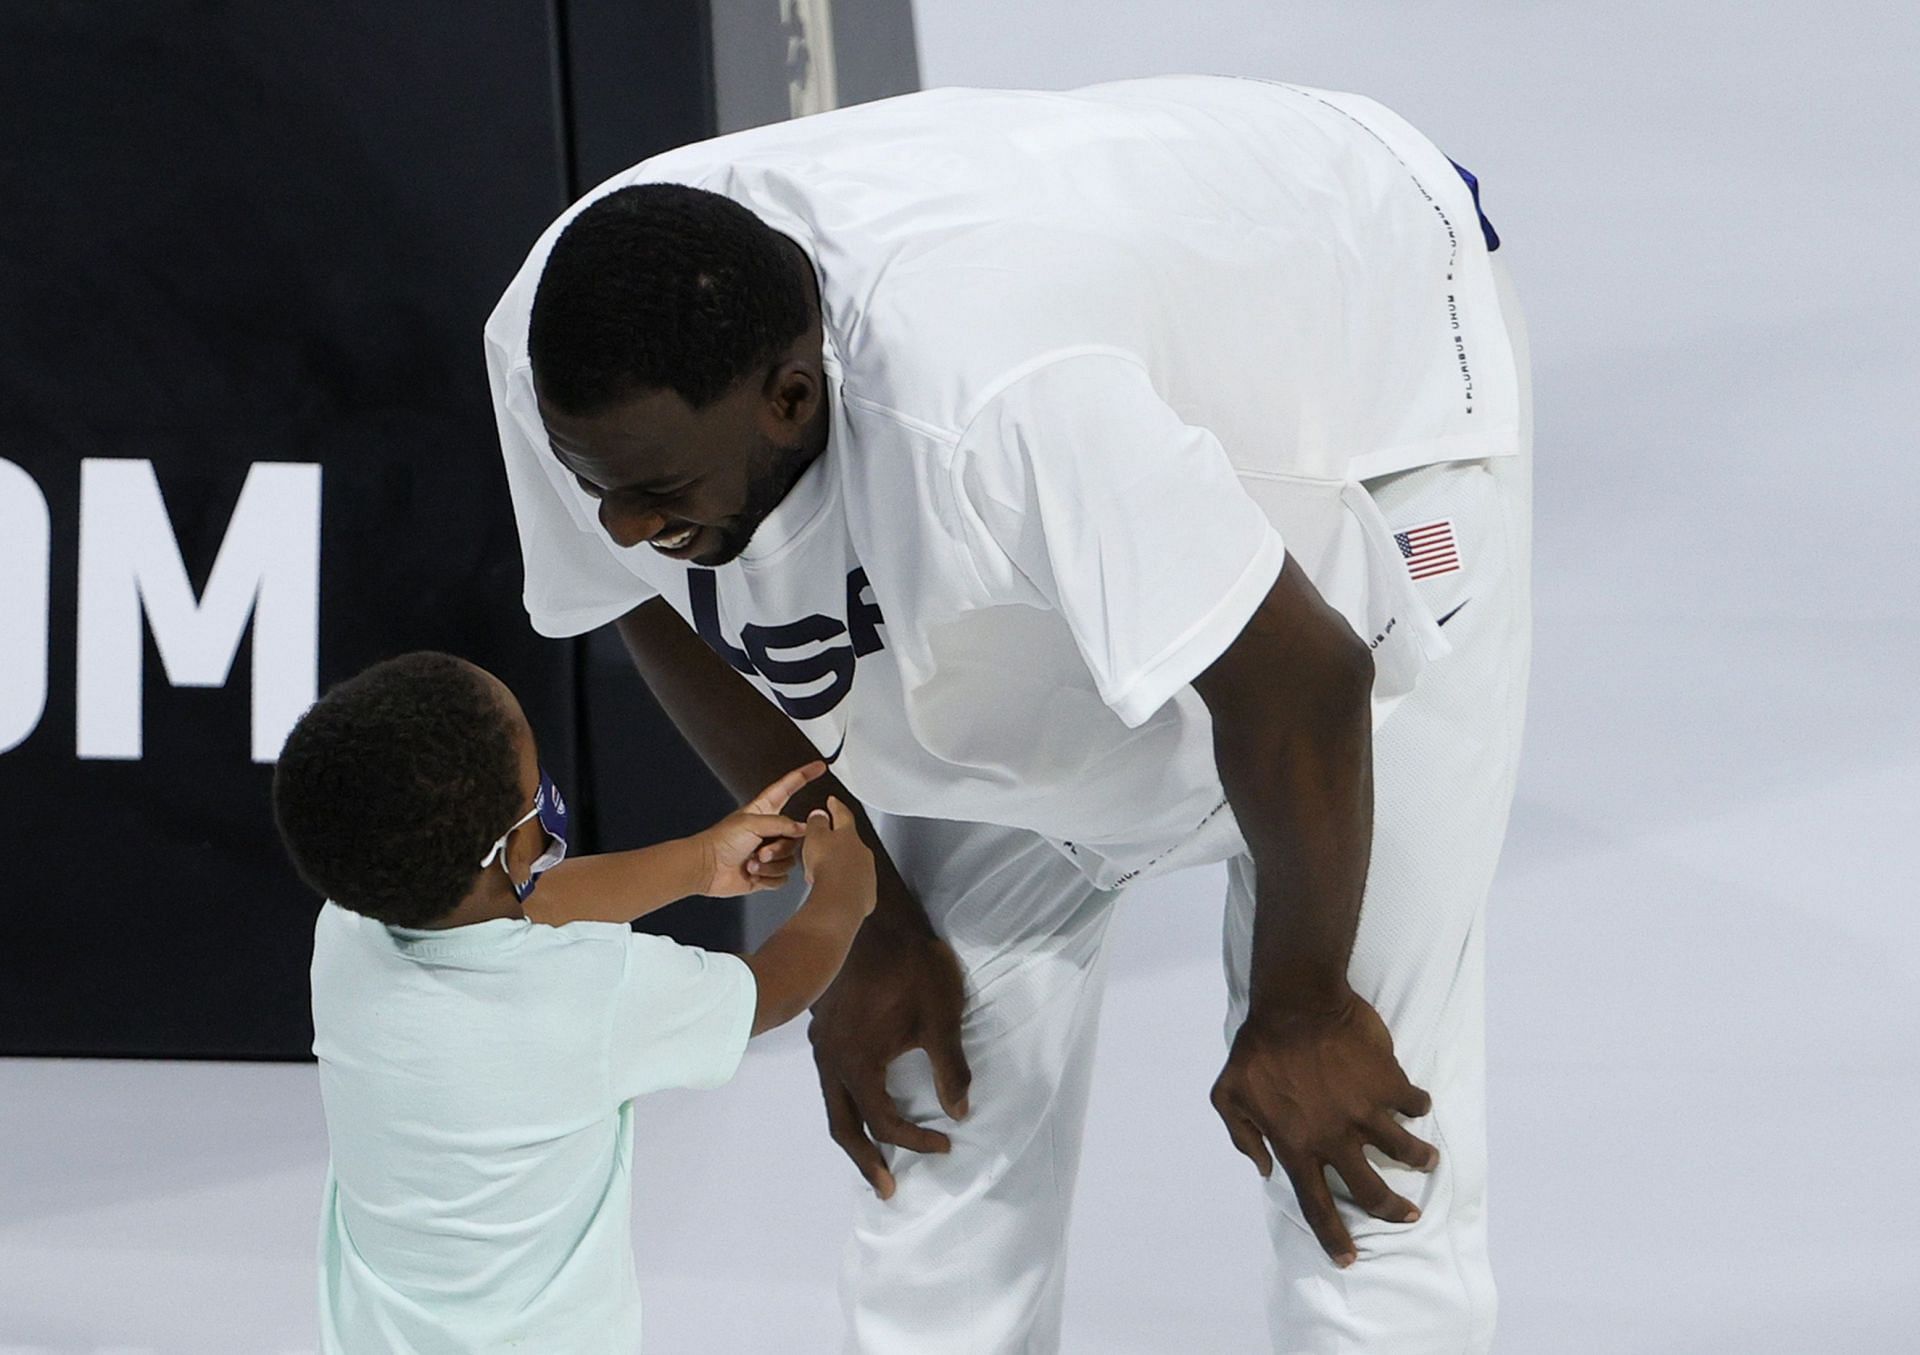 Draymond Green brought along his son to the Footprint Center for an away game against the Phoenix Suns.